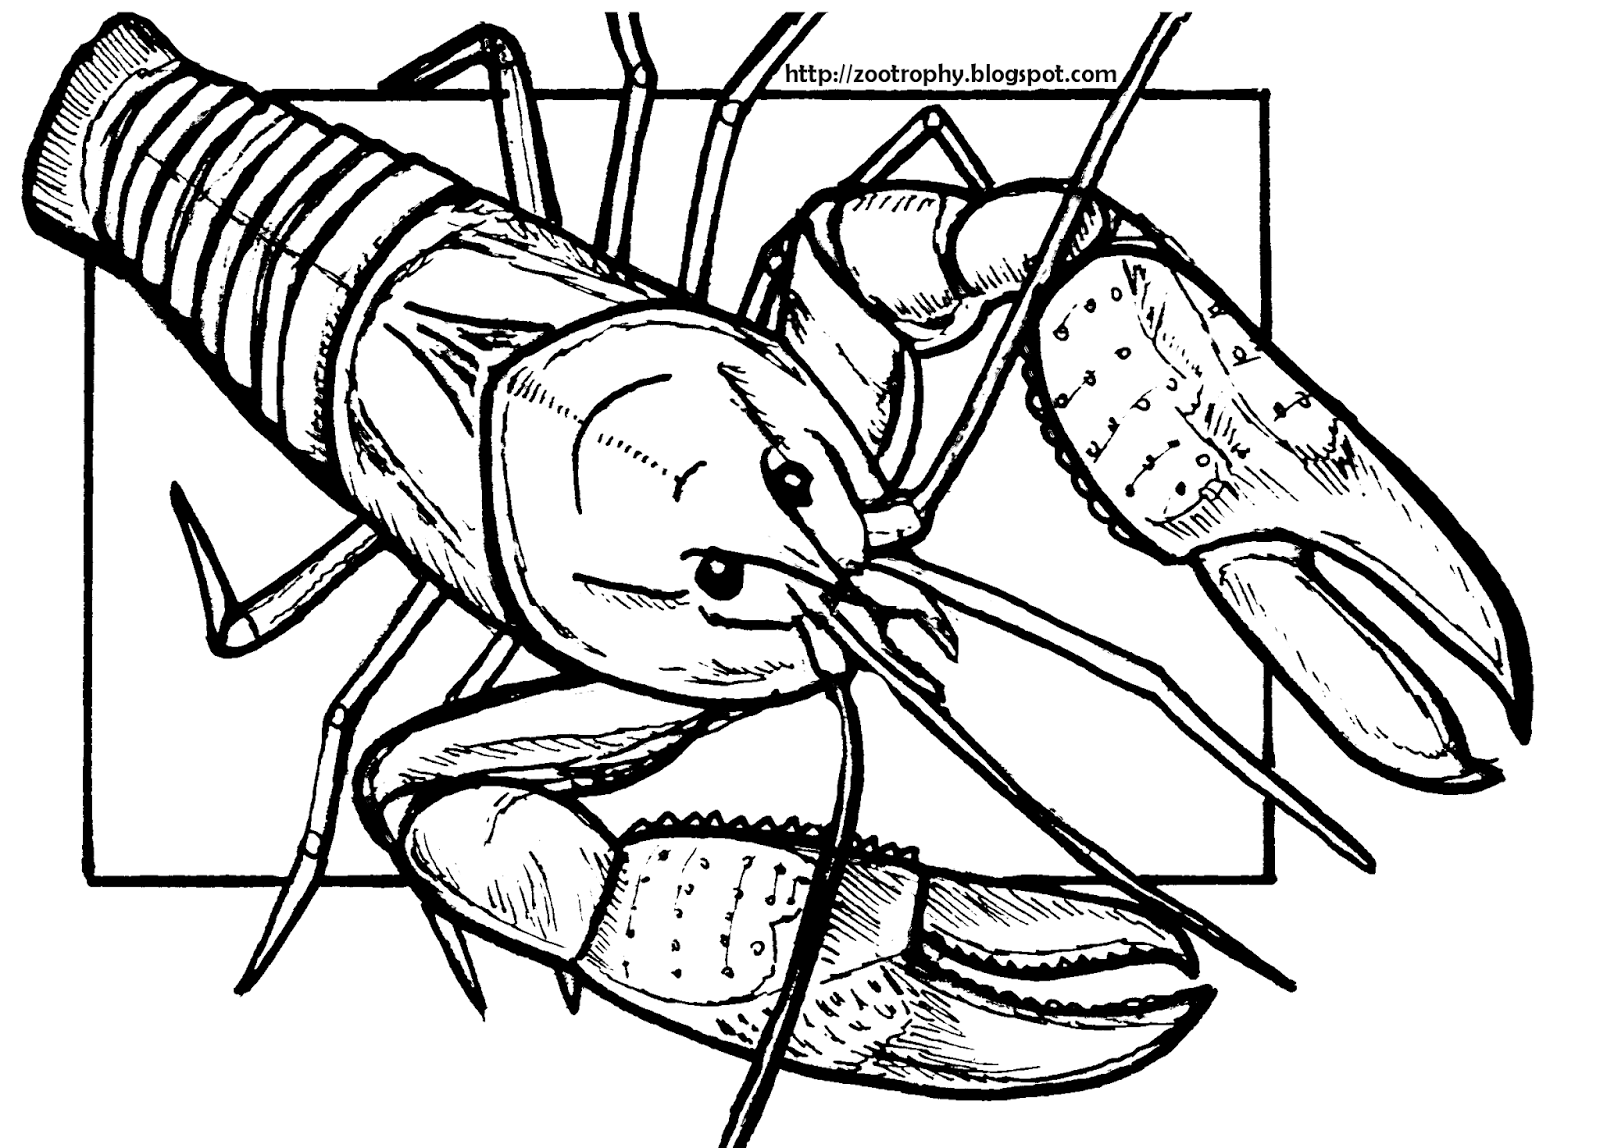 Yabby PNG - 41878